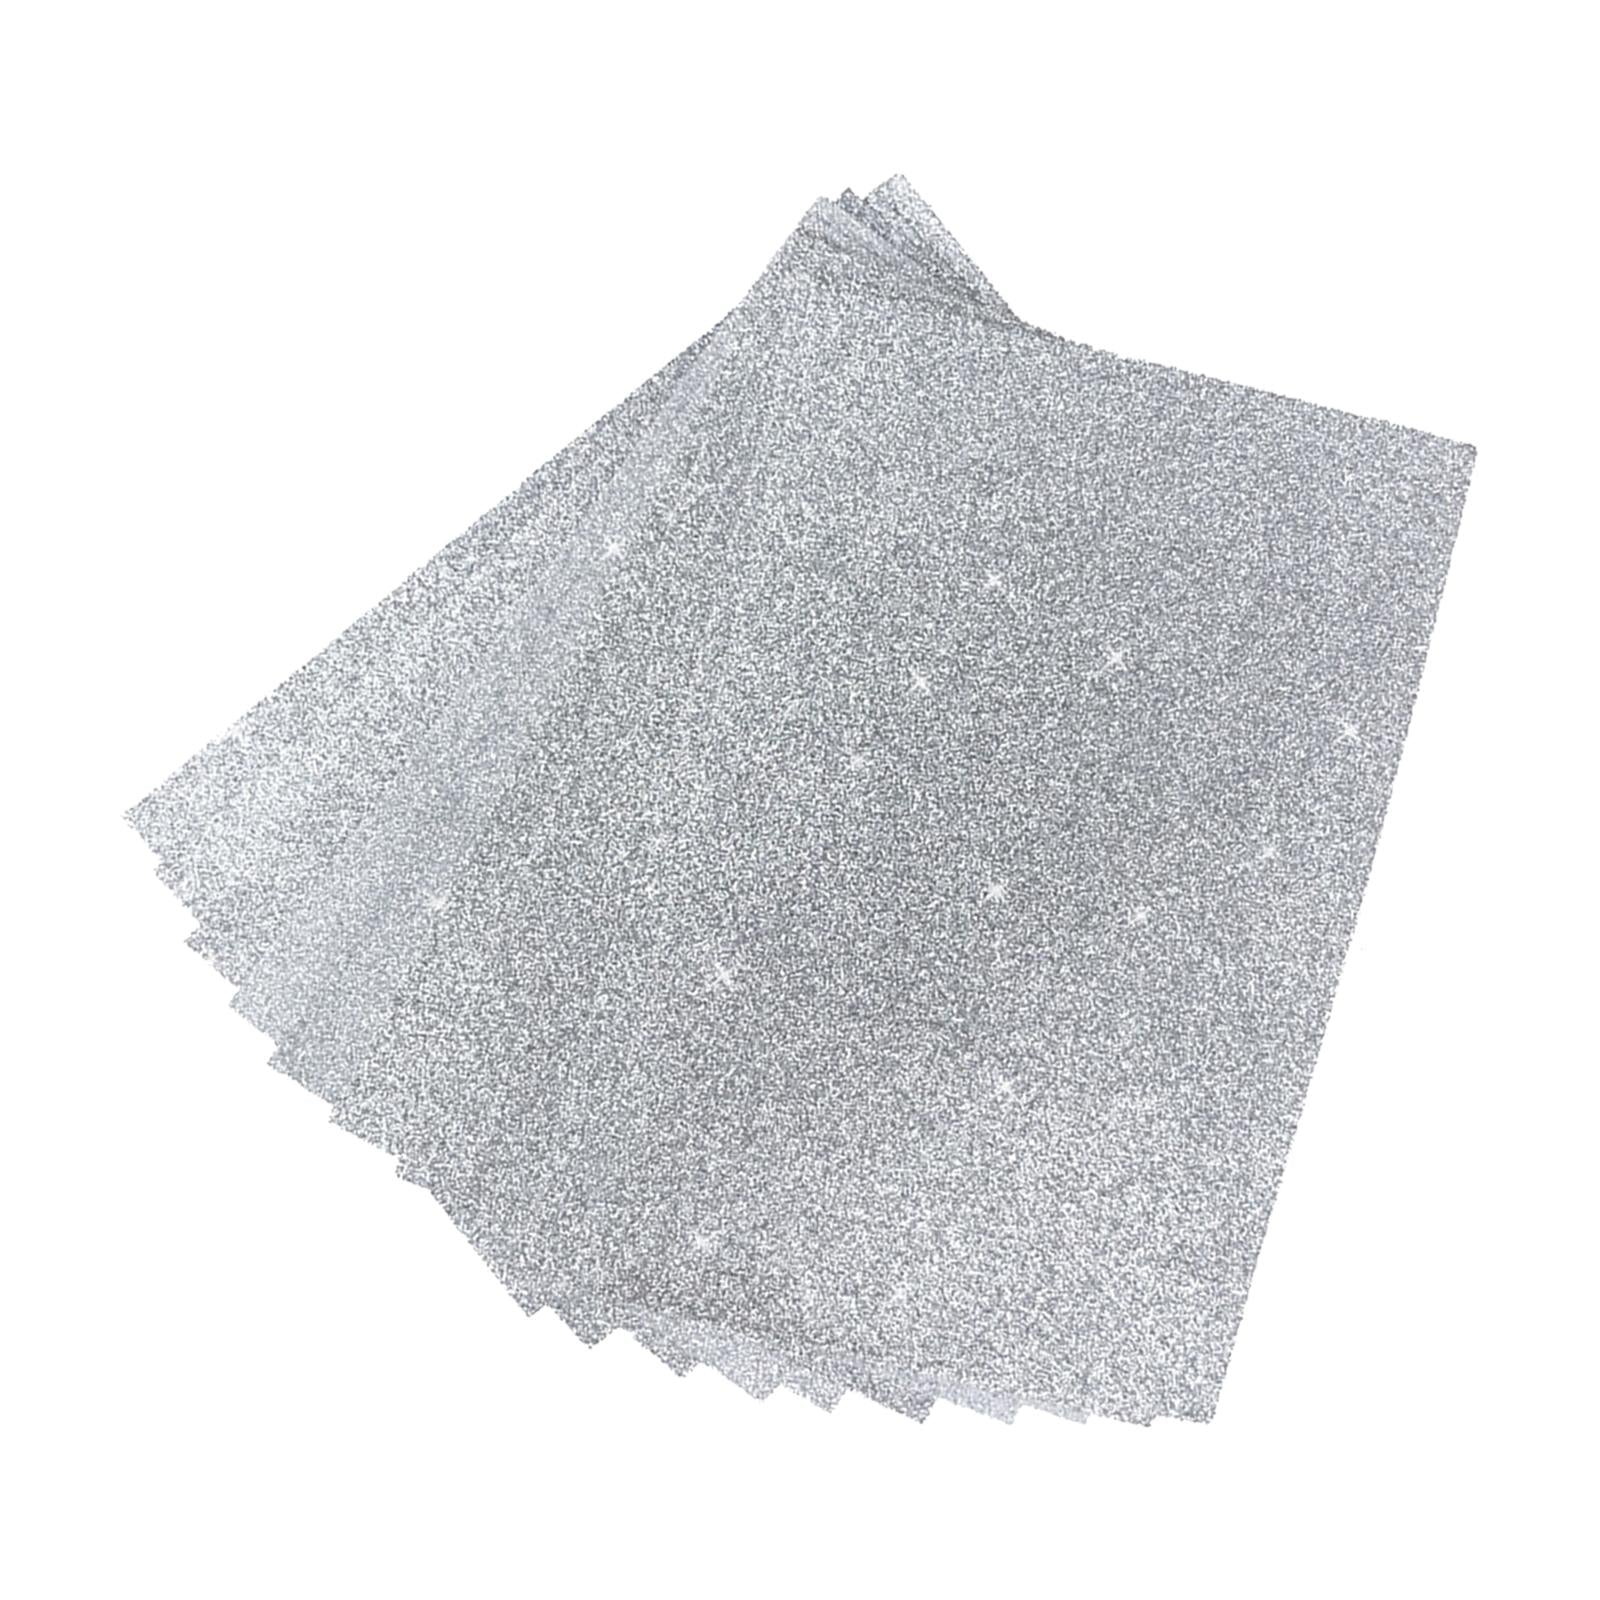 Glitter Sponge Paper Cardstock Scrapbooking for Collages Birthday Decor Silver